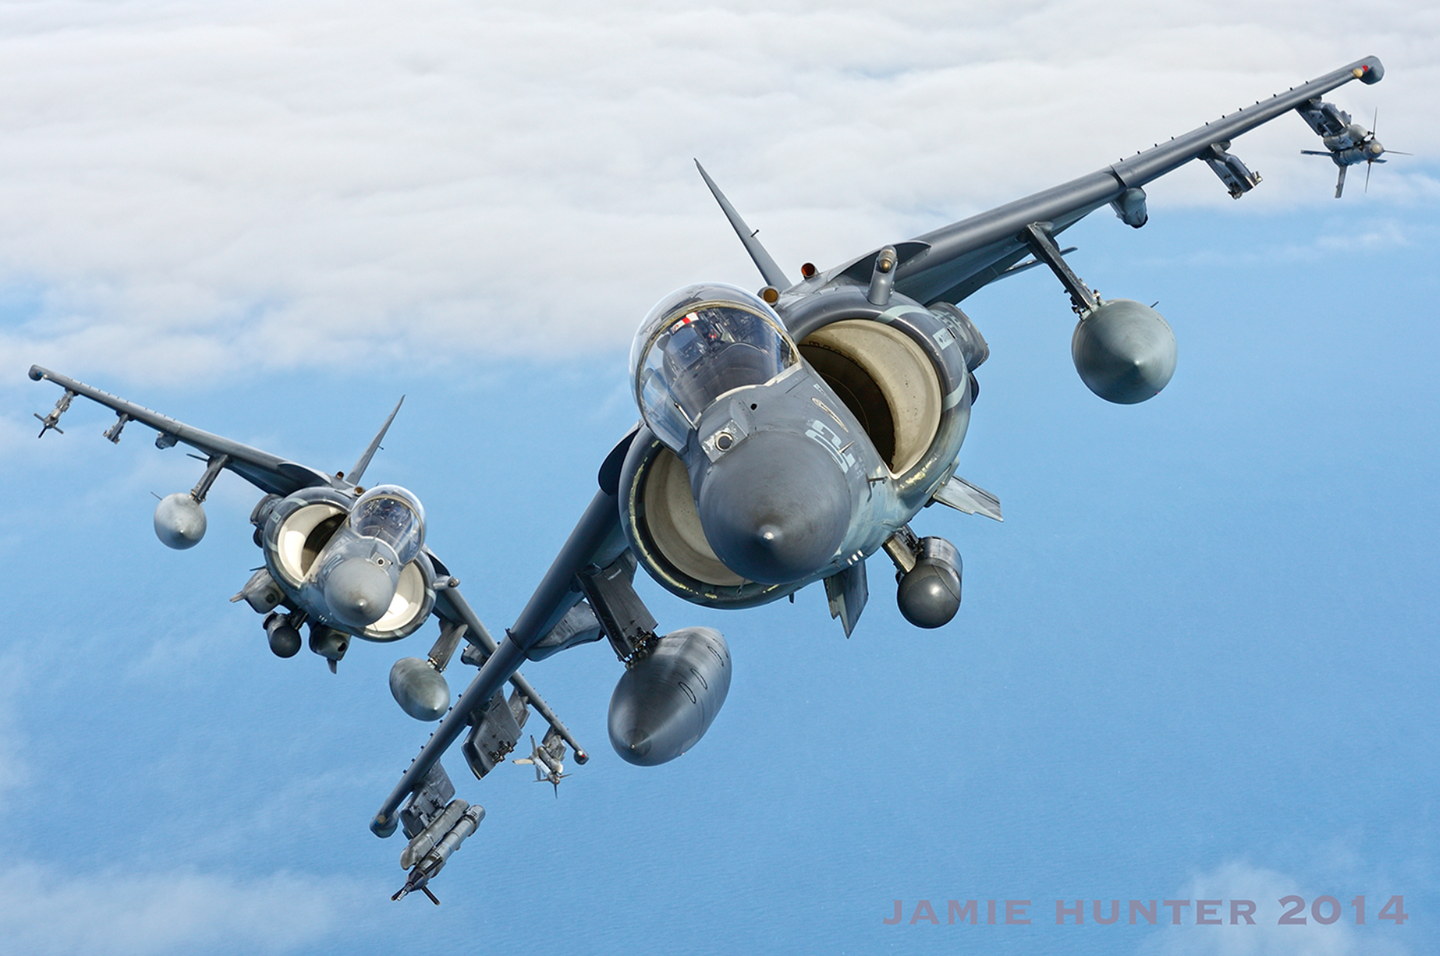 Radar-equipped AV-8B Harrier IIs from Marine Attack Squadron 223 (VMA-223) configured for close-quarters air combat, with Sidewinder missiles and (on the rear aircraft) an Equalizer 25mm gun pod below the fuselage. <em>Jamie Hunter</em>